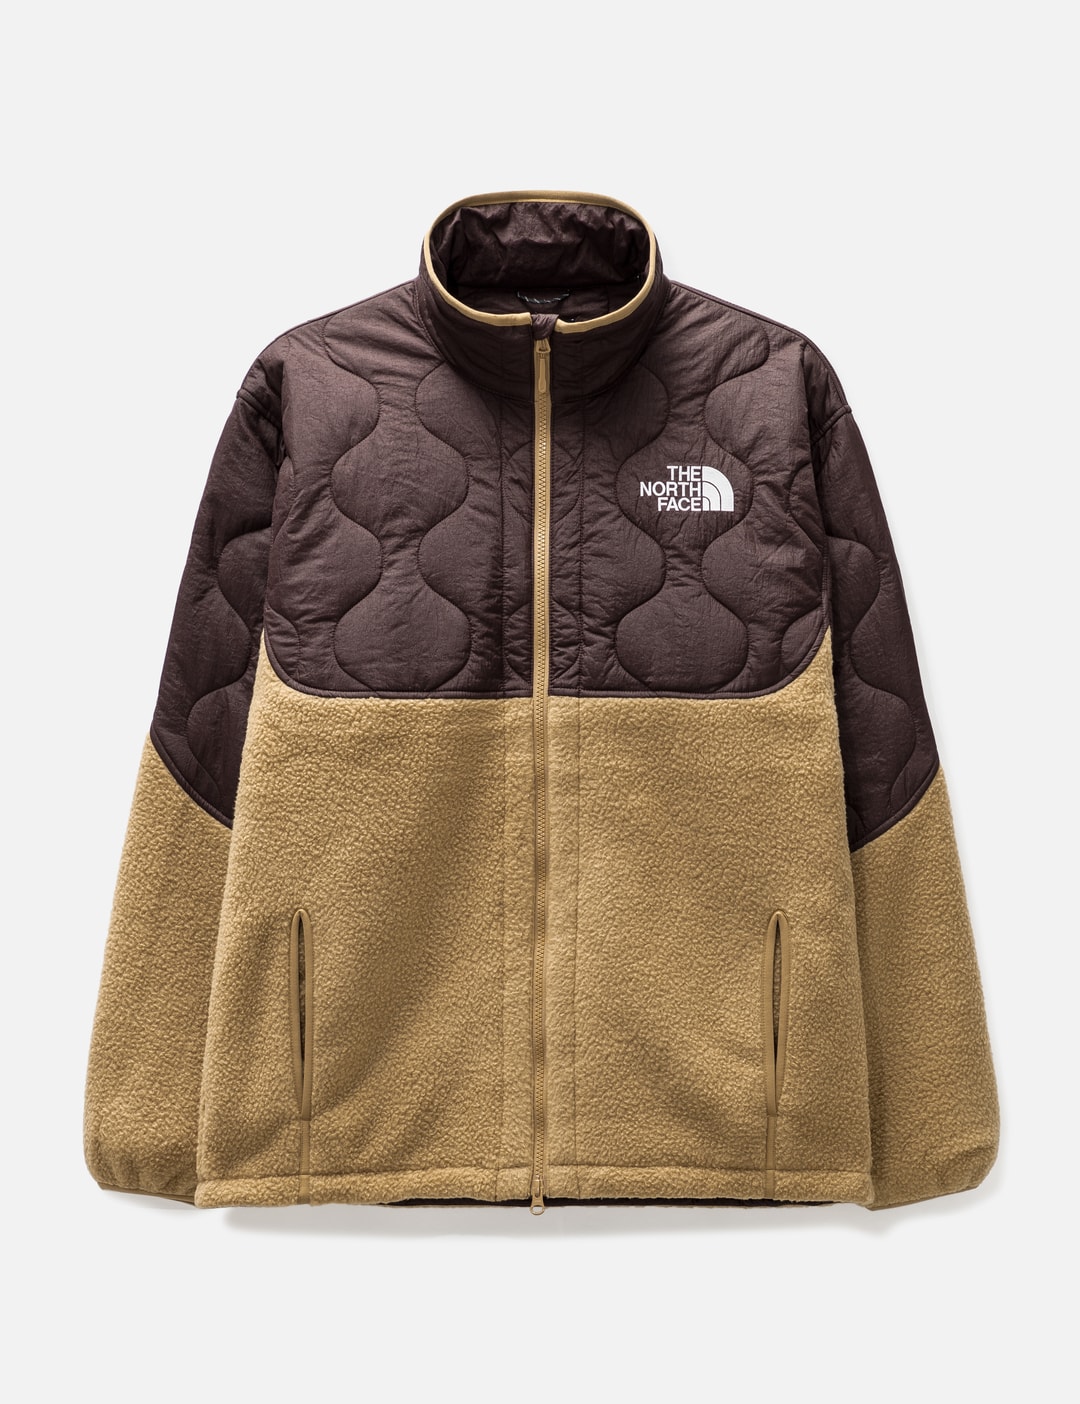 The North Face - Vintage Fleece Jacket | HBX - Globally Curated Fashion ...